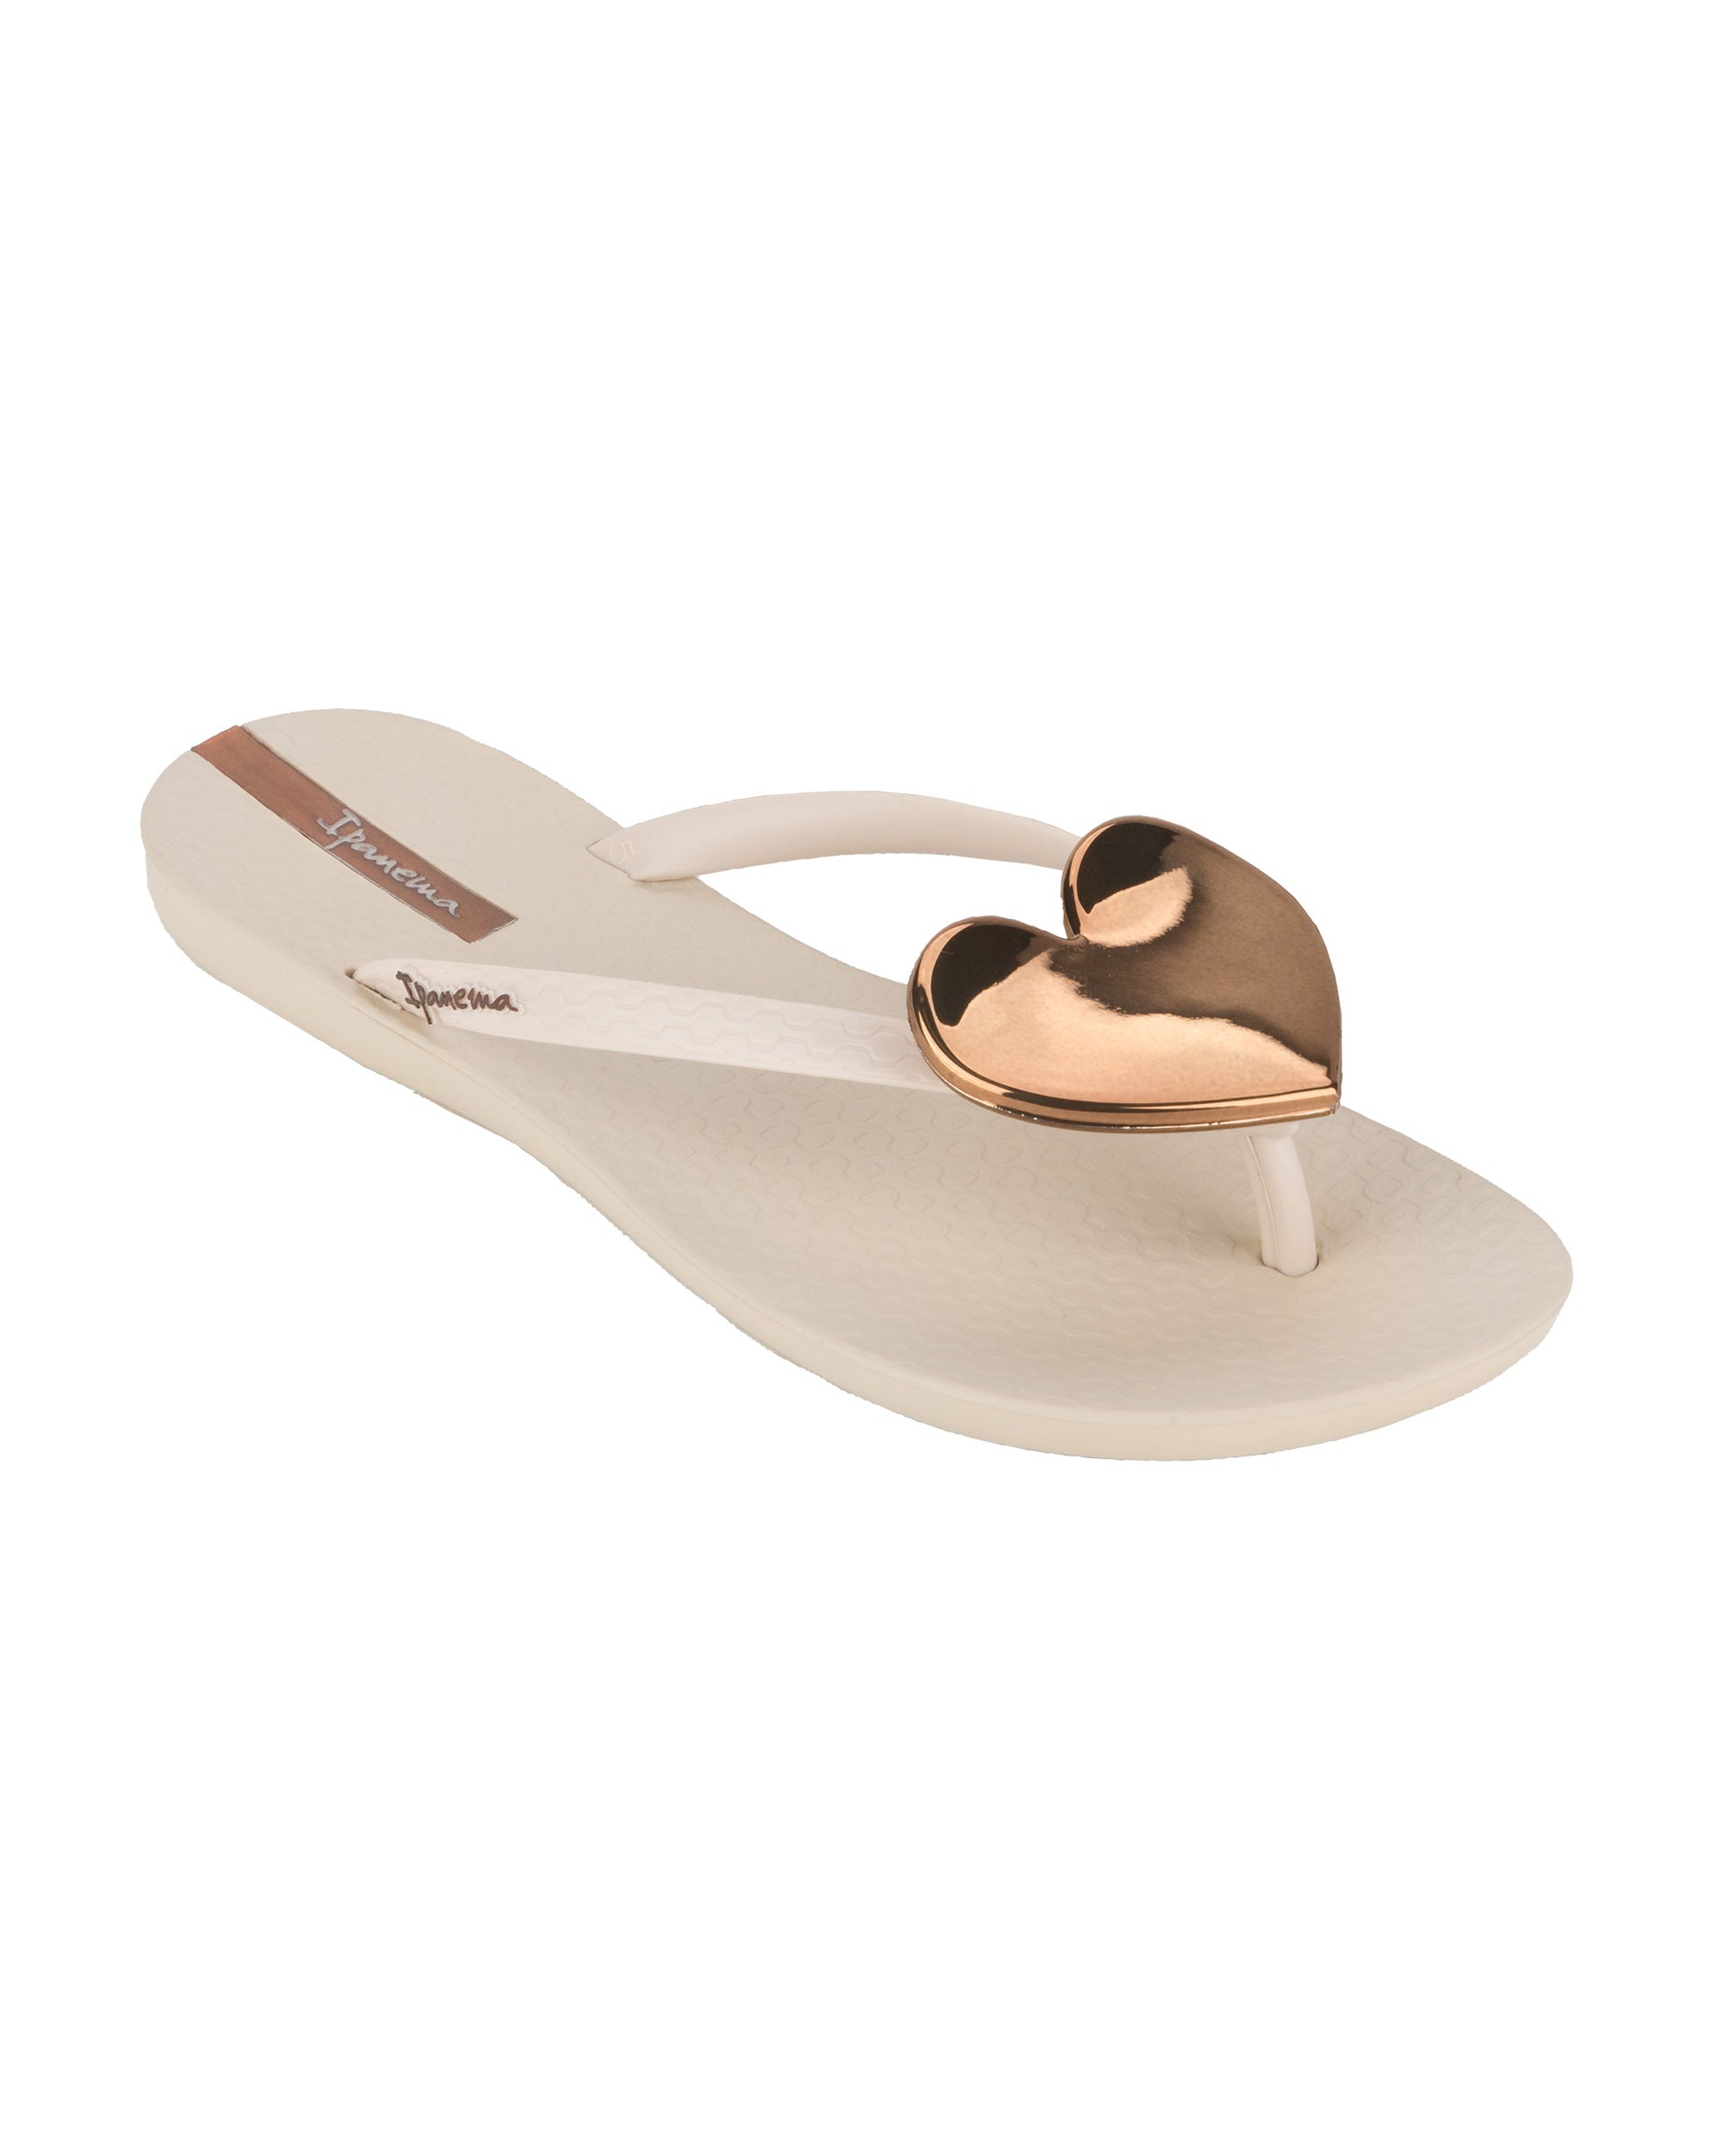 Angled view of a beige Ipanema Wave Heart women's flip flop with bronze heart.